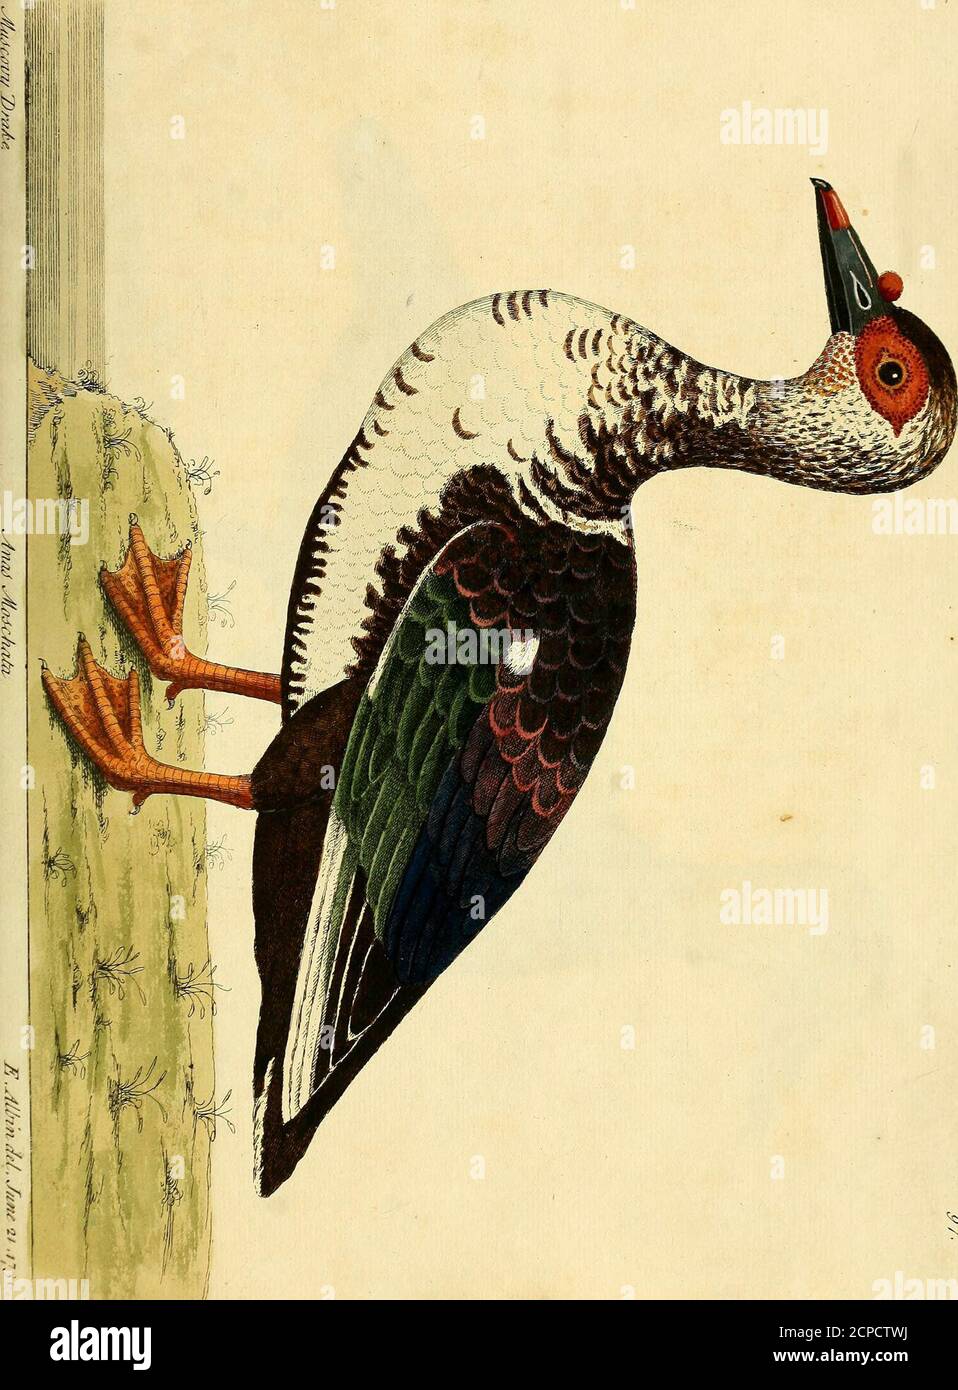 . A natural history of birds : illustrated with a hundred and one copper plates, curiously engraven from the life . theend 5 the upper Mandible hath a round tuberous pieceof Flefh growing between the Noftrils, reprefenting a fmallrtd Cherry^ it is red towards the end, the Hook black j theIrides of the Eyes are white round; it is a red flefhy Sub-ftance like that on the top of the Bill. The top of the Head and Neck are dufky, motled withwhite, the Back and Wings of an odd Mixture of Colours,viz. dark brown, red, purple, green, and white; the Breaftand Belly are white, with fome few brown Feathe Stock Photo